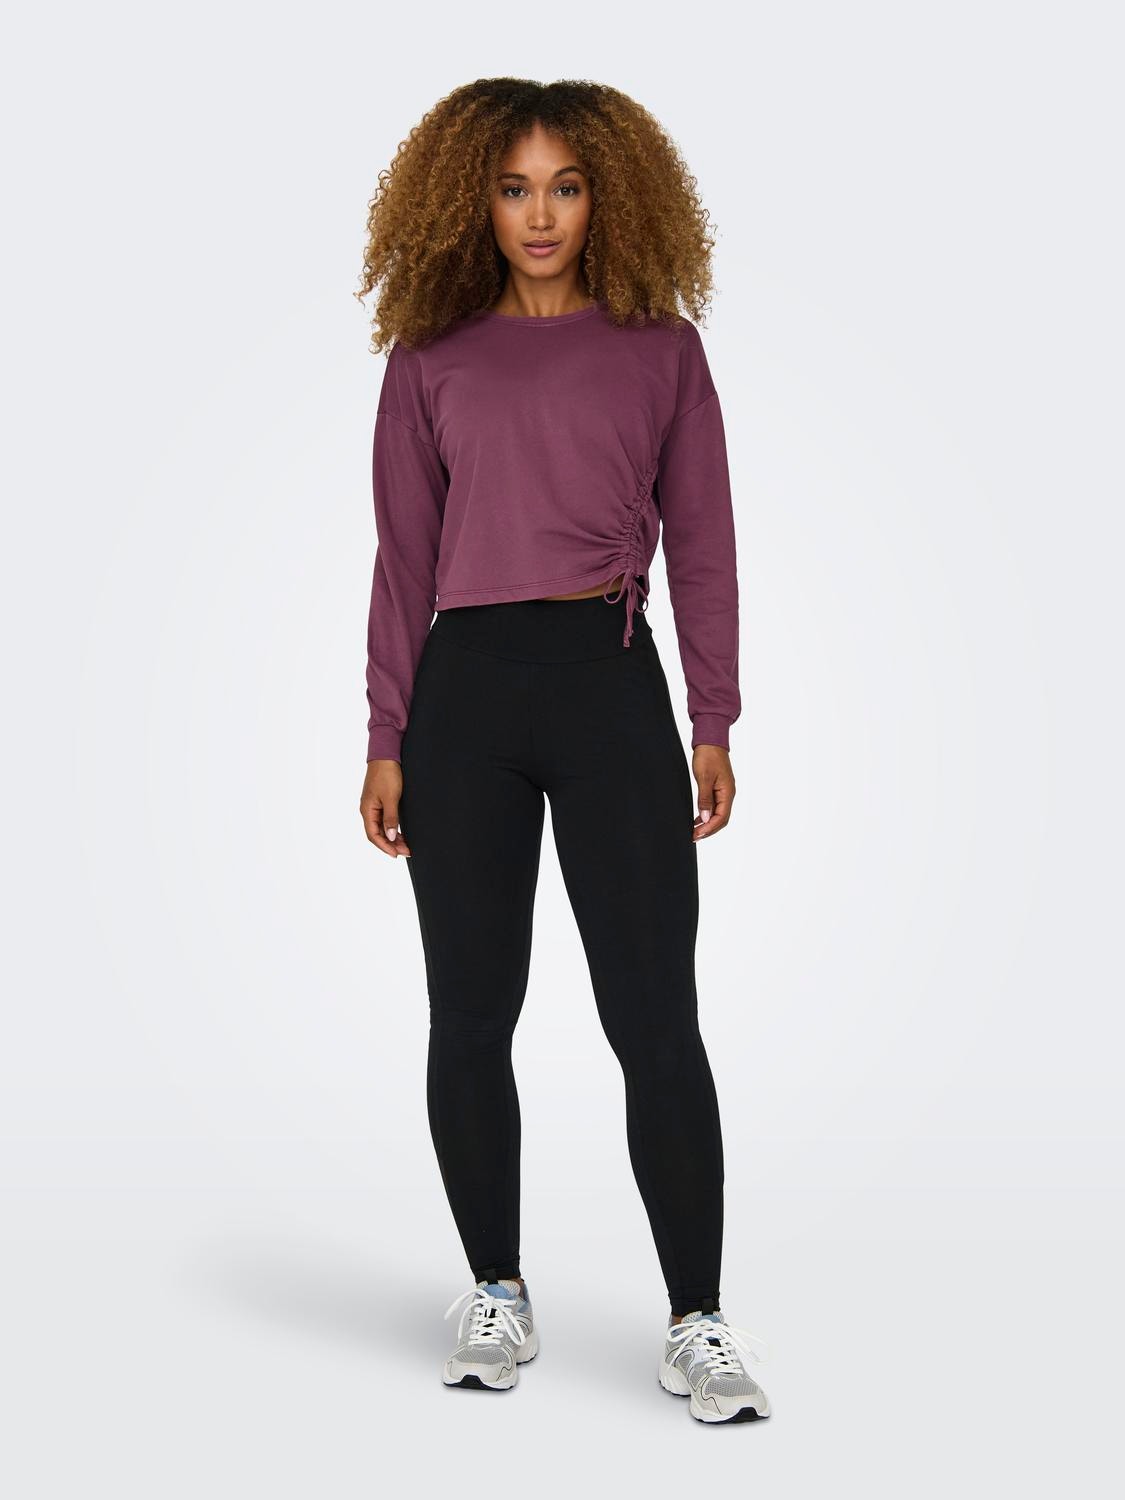 ONLY Slim Fit Hohe Taille Leggings -Black - 15295799